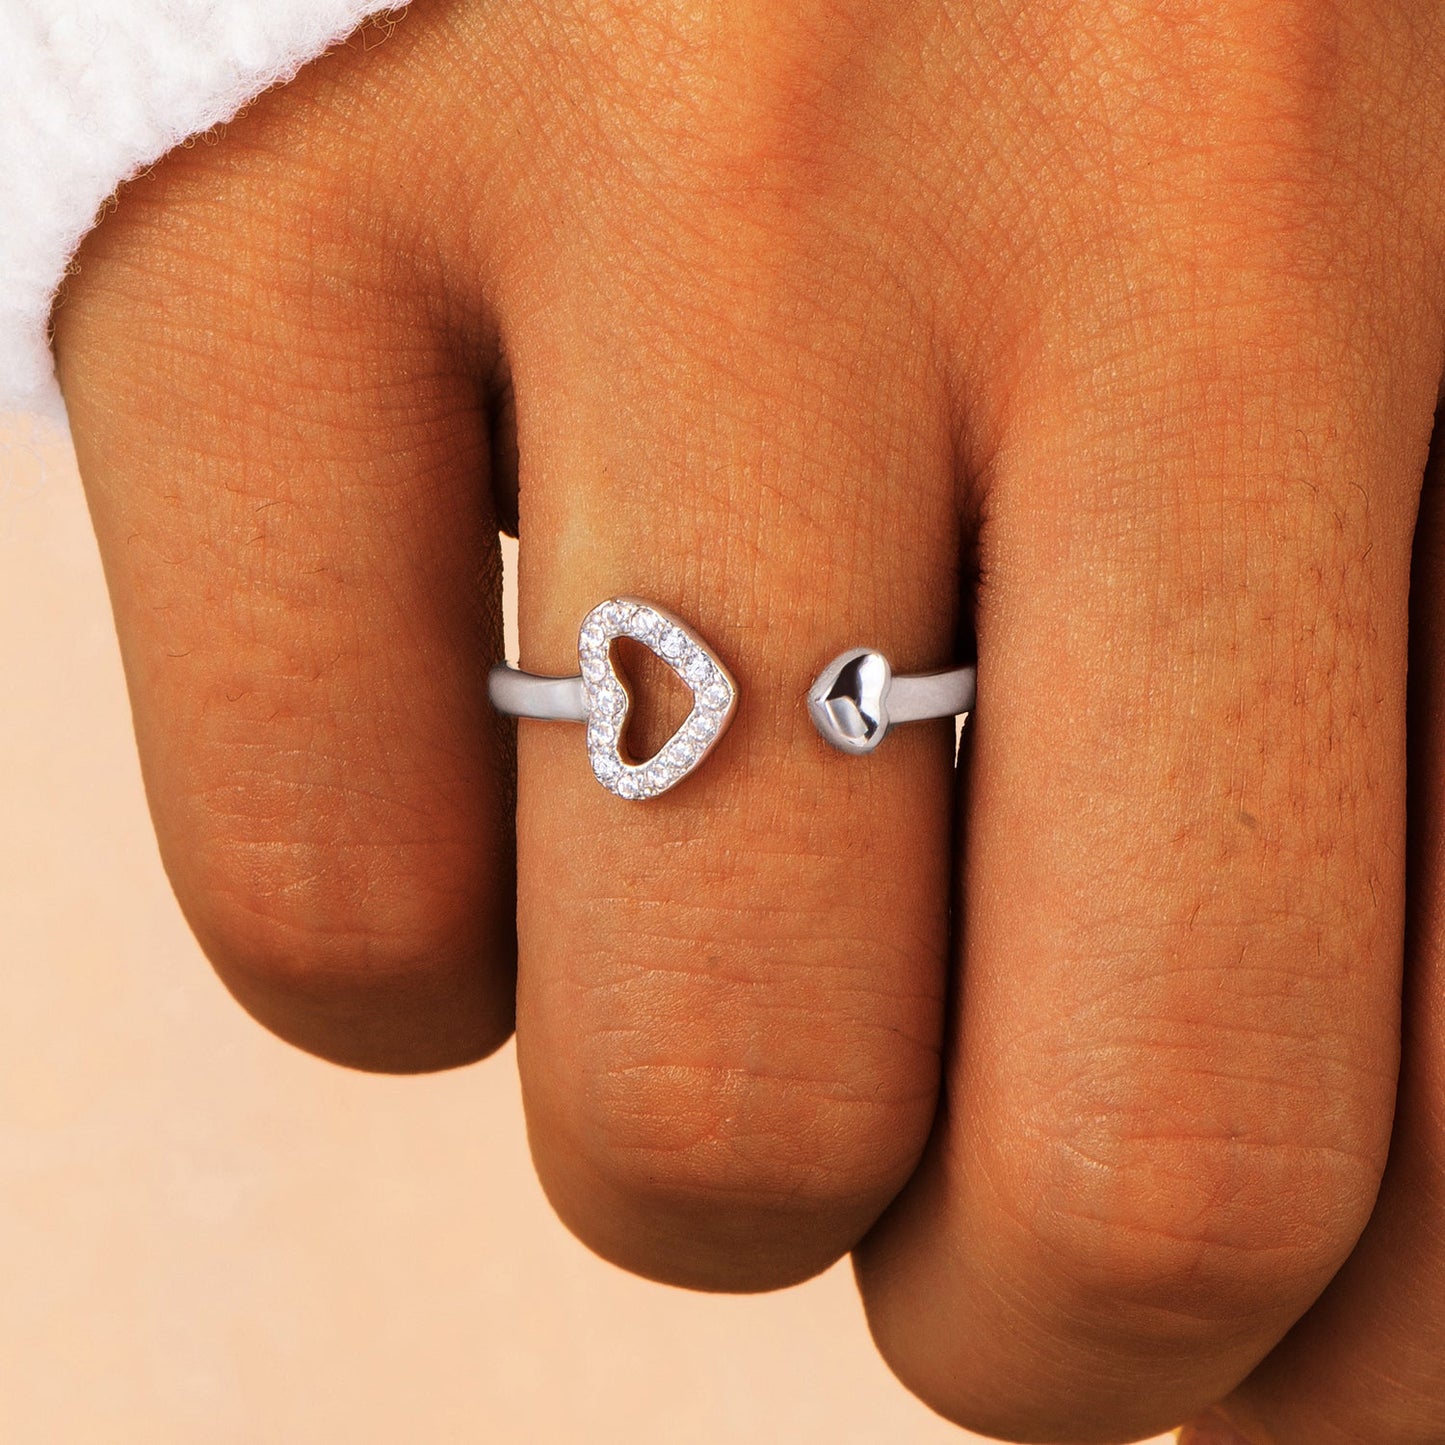 "Grandmother's wisdom and her grandchild's joy make them inseparable" Double Heart Ring